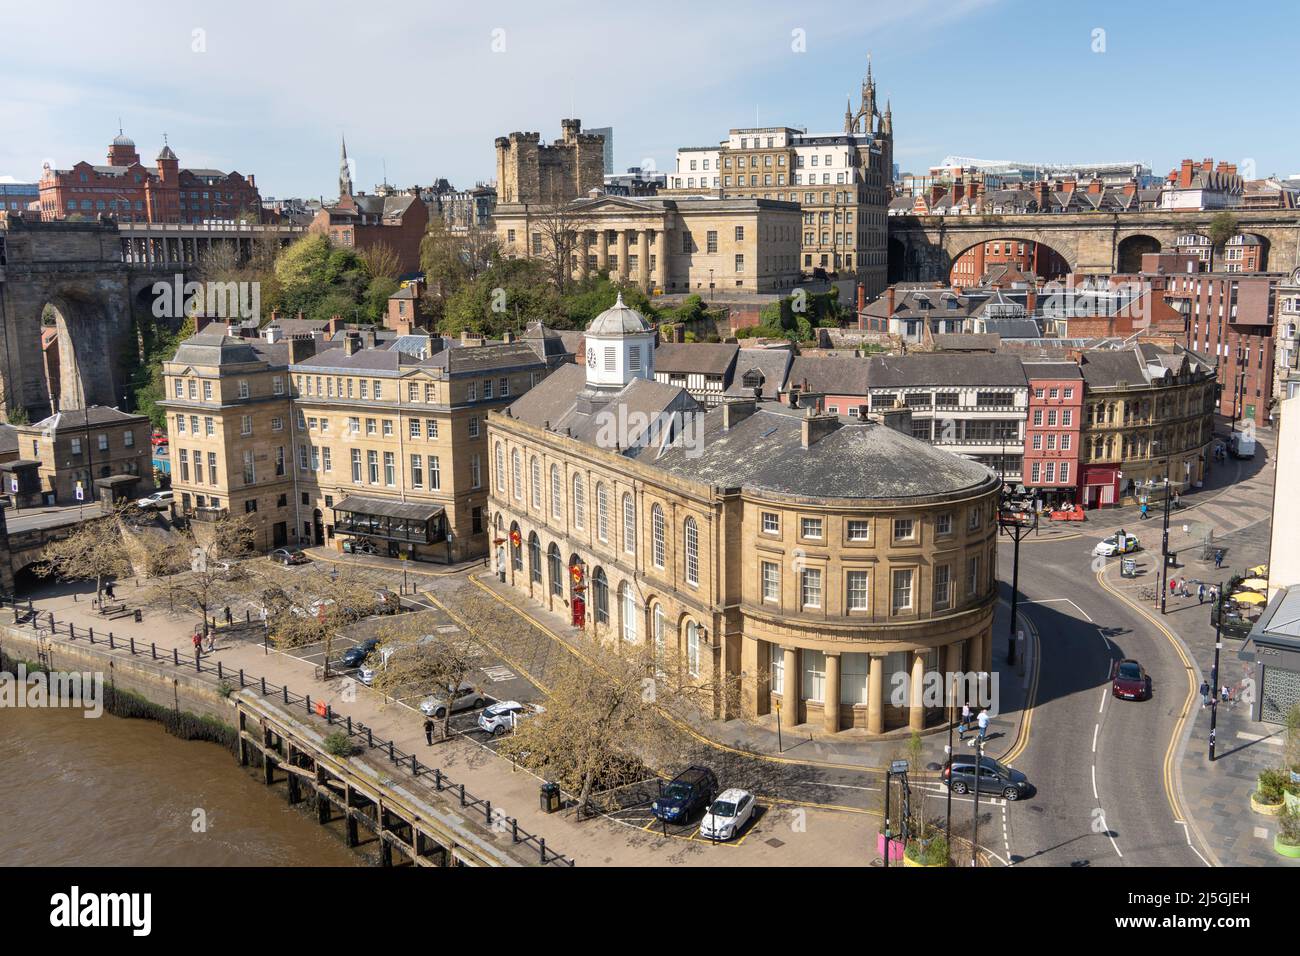 View looking down to the Newcastle upon Tyne, UK Quayside from the Tyne Bridge, including the Guildhall, with a Hard Rock Café. Stock Photo